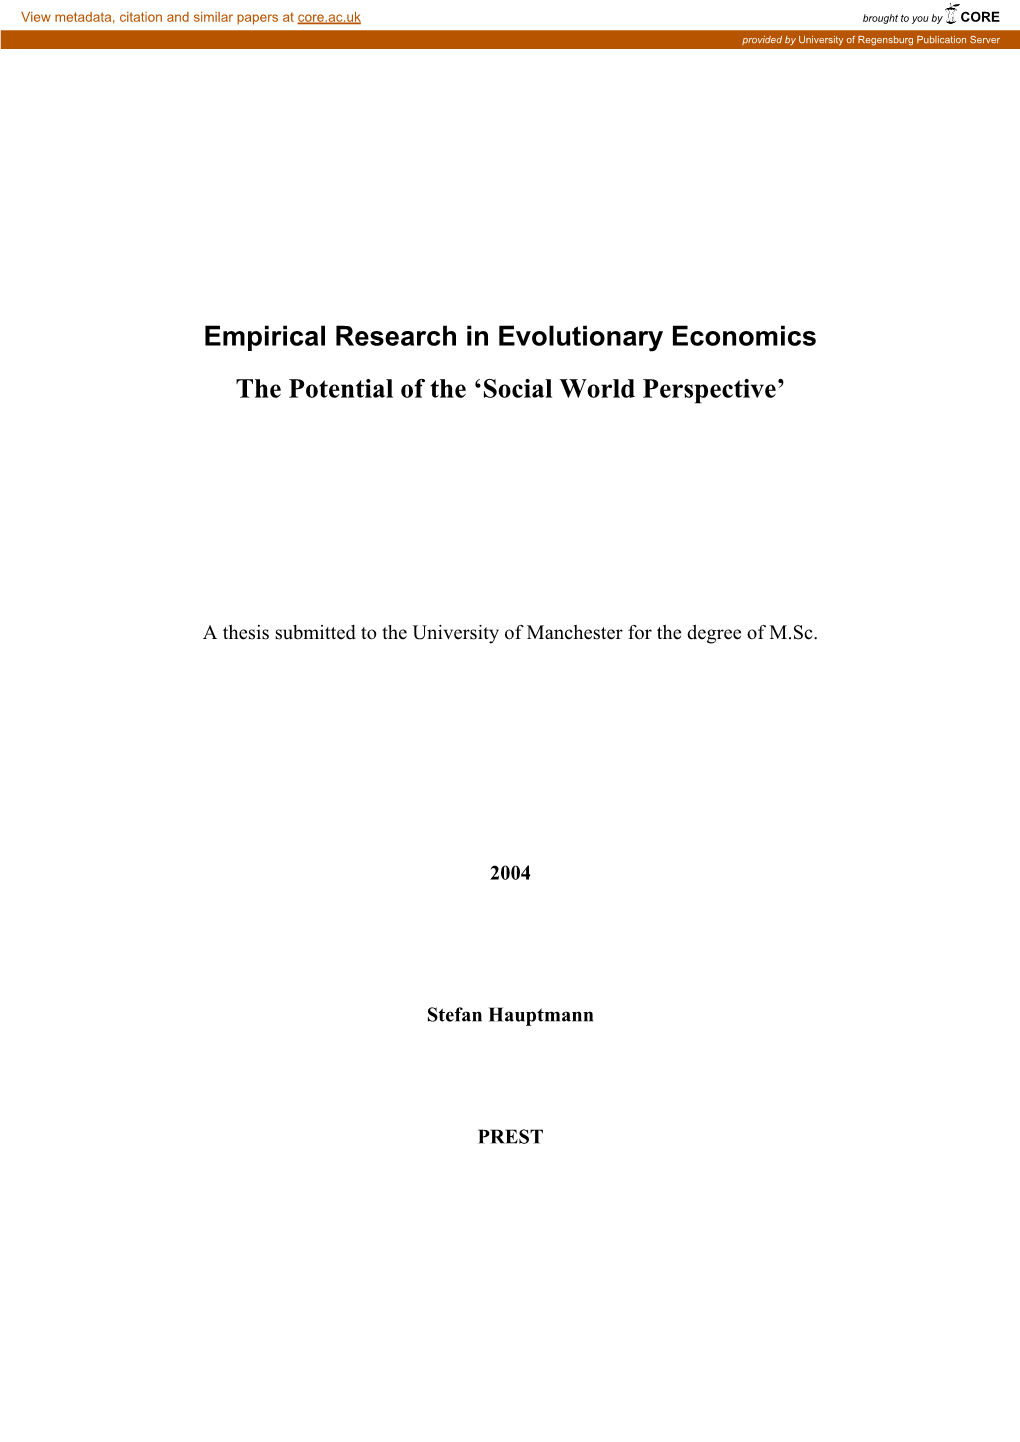 Empirical Research in Evolutionary Economics the Potential of the ‘Social World Perspective’